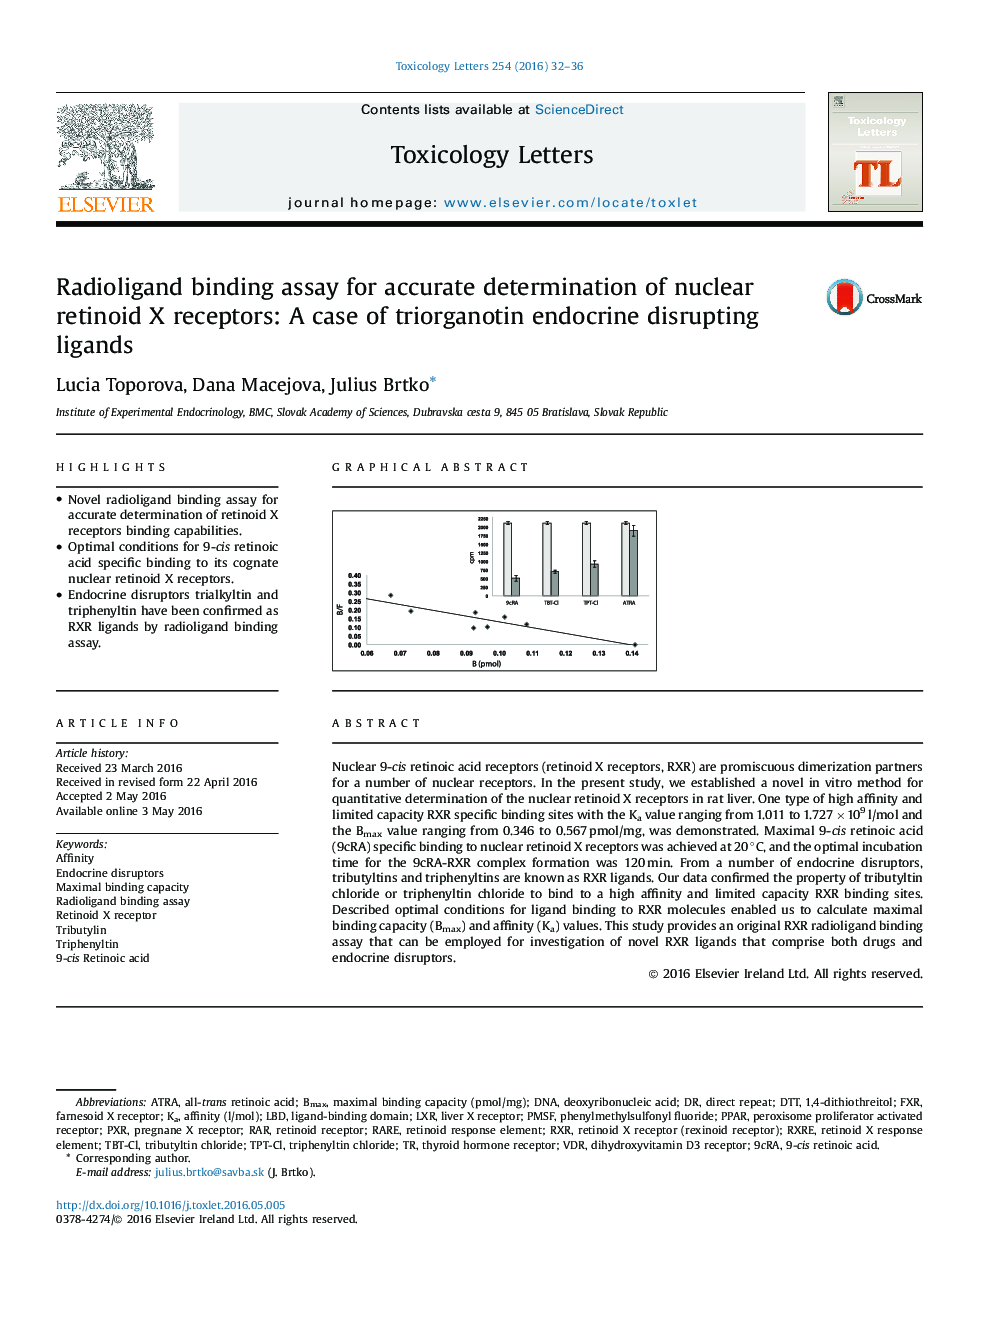 Radioligand binding assay for accurate determination of nuclear retinoid X receptors: A case of triorganotin endocrine disrupting ligands